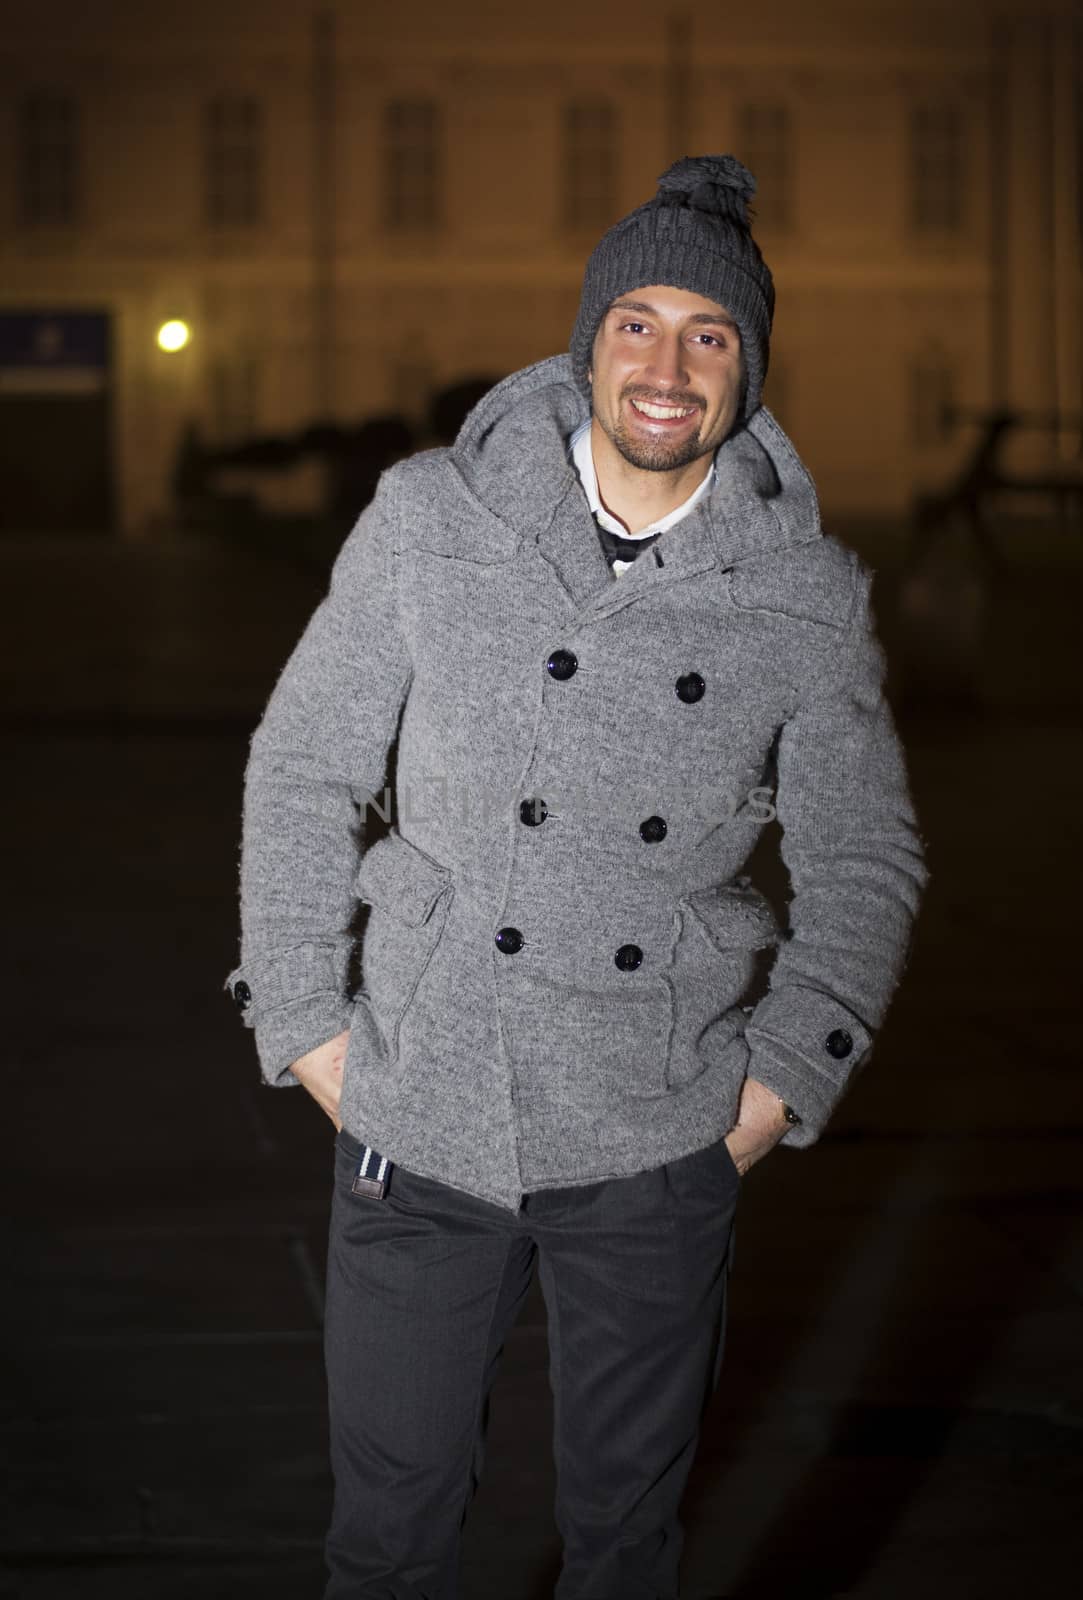 Attractive young man at night in Piazza Castello in Turin, Italy, wearing wool hat and coat